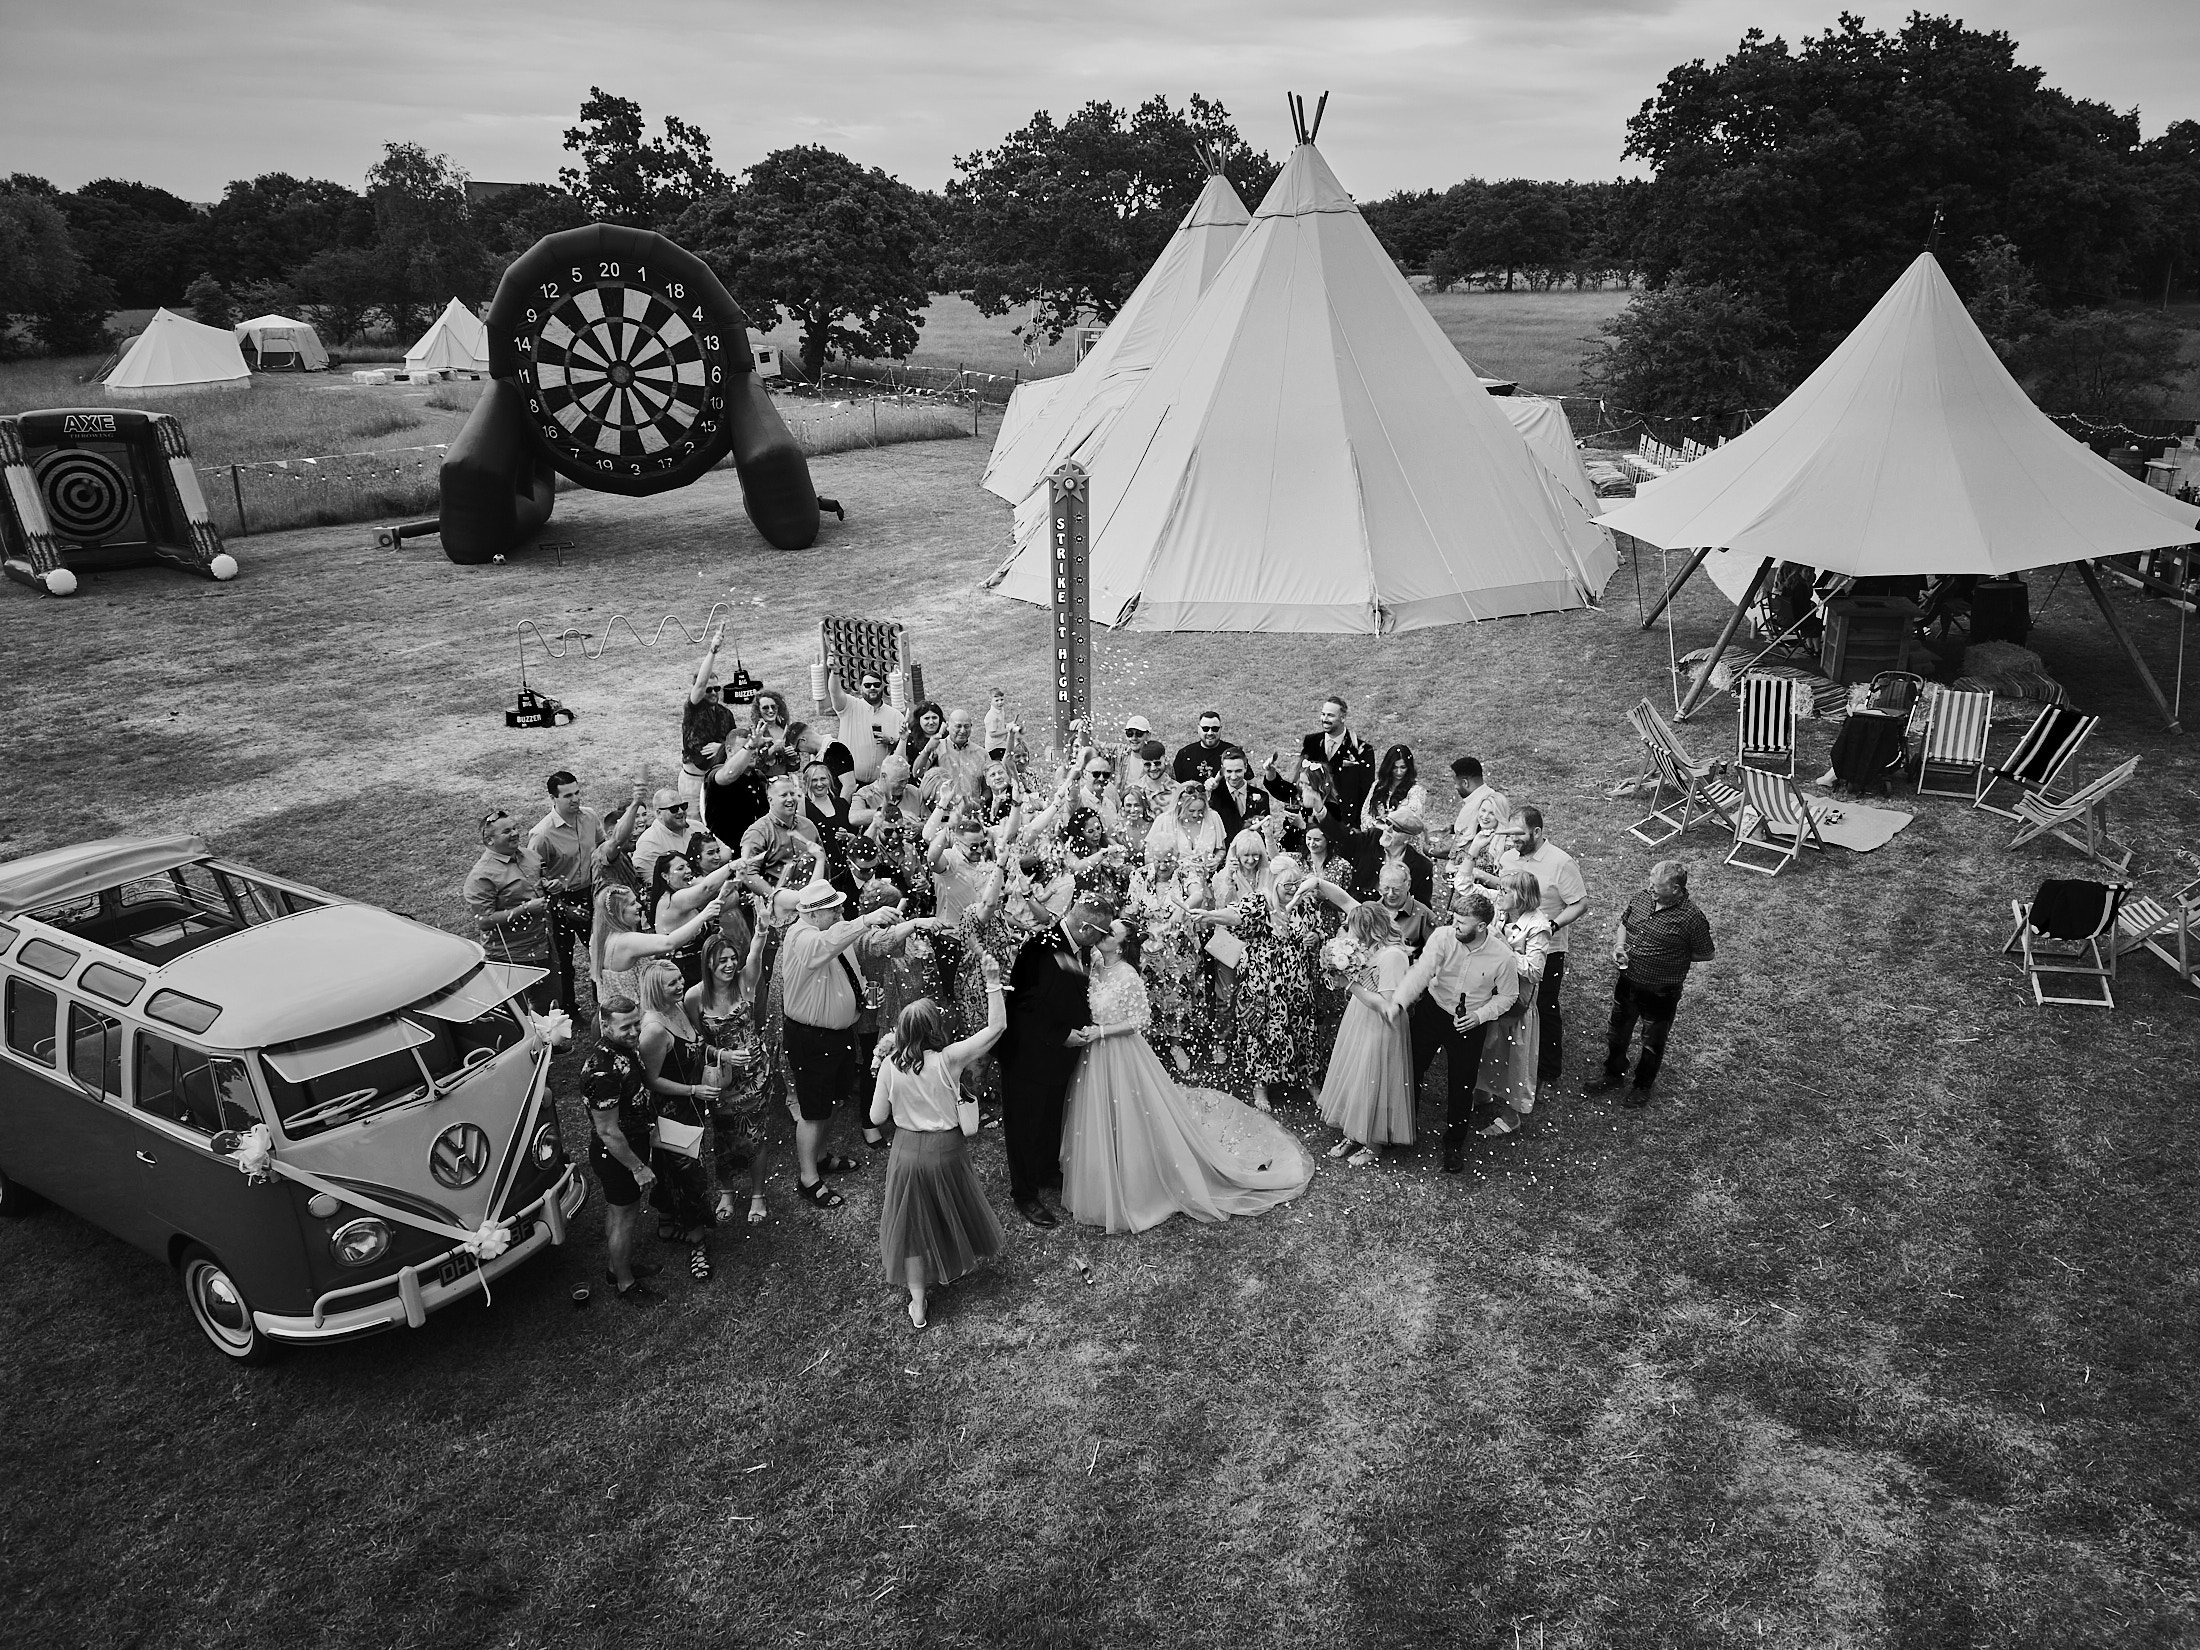 festival theme wedding captured with drone